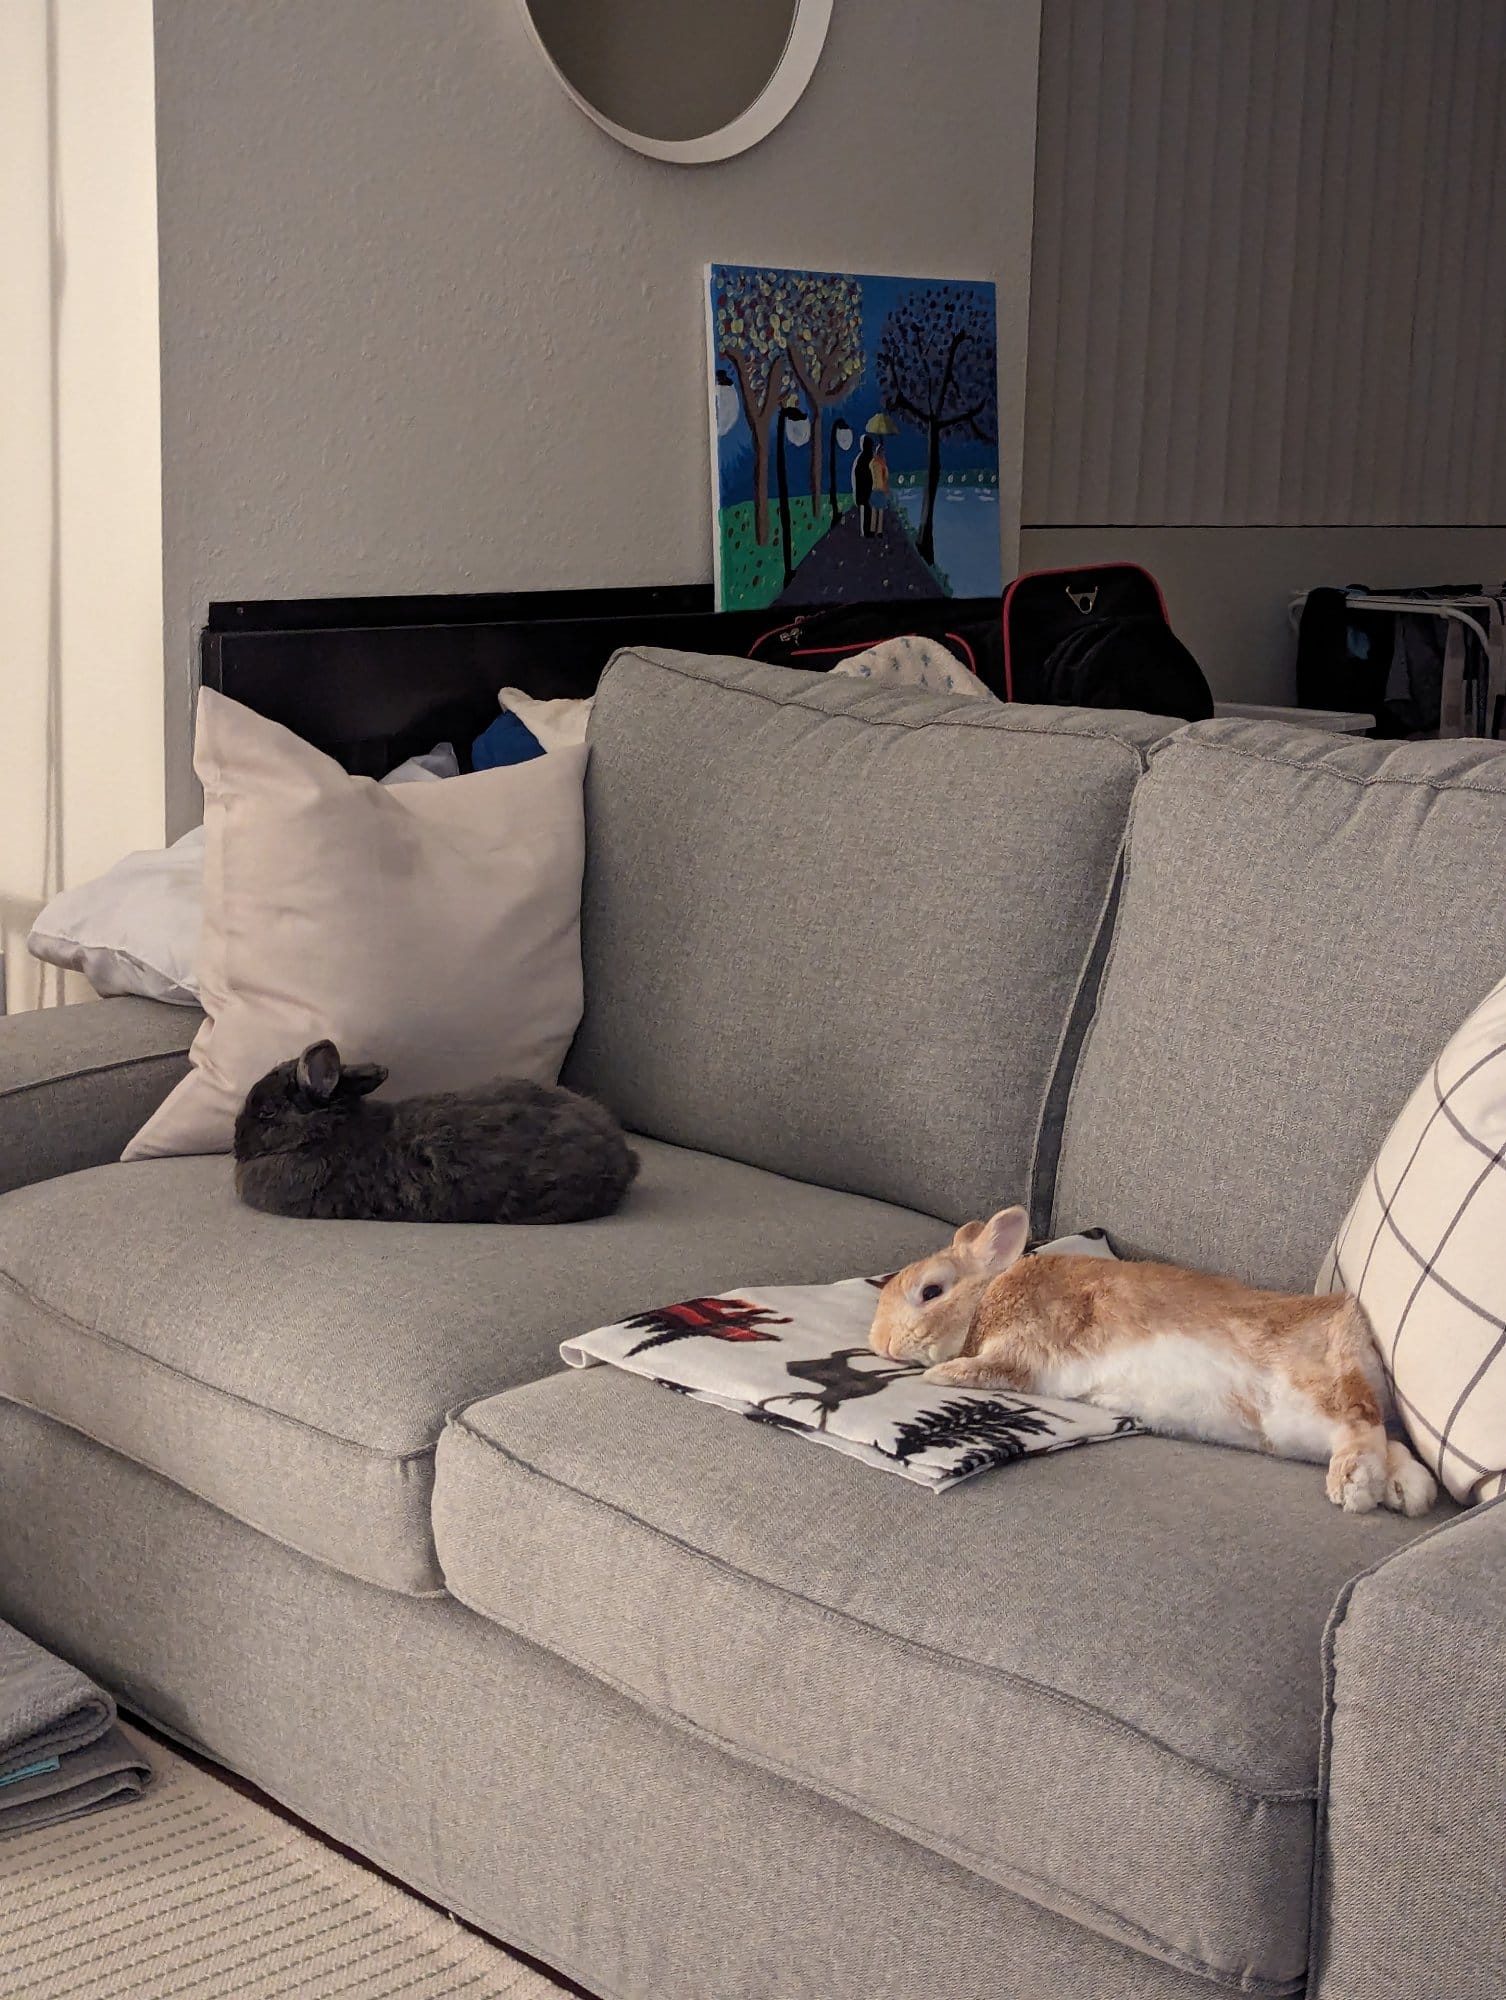 A cosy living room scene with two rabbits, one black and one orange & white, resting on a grey sofa, with a colourful painting on the wall above